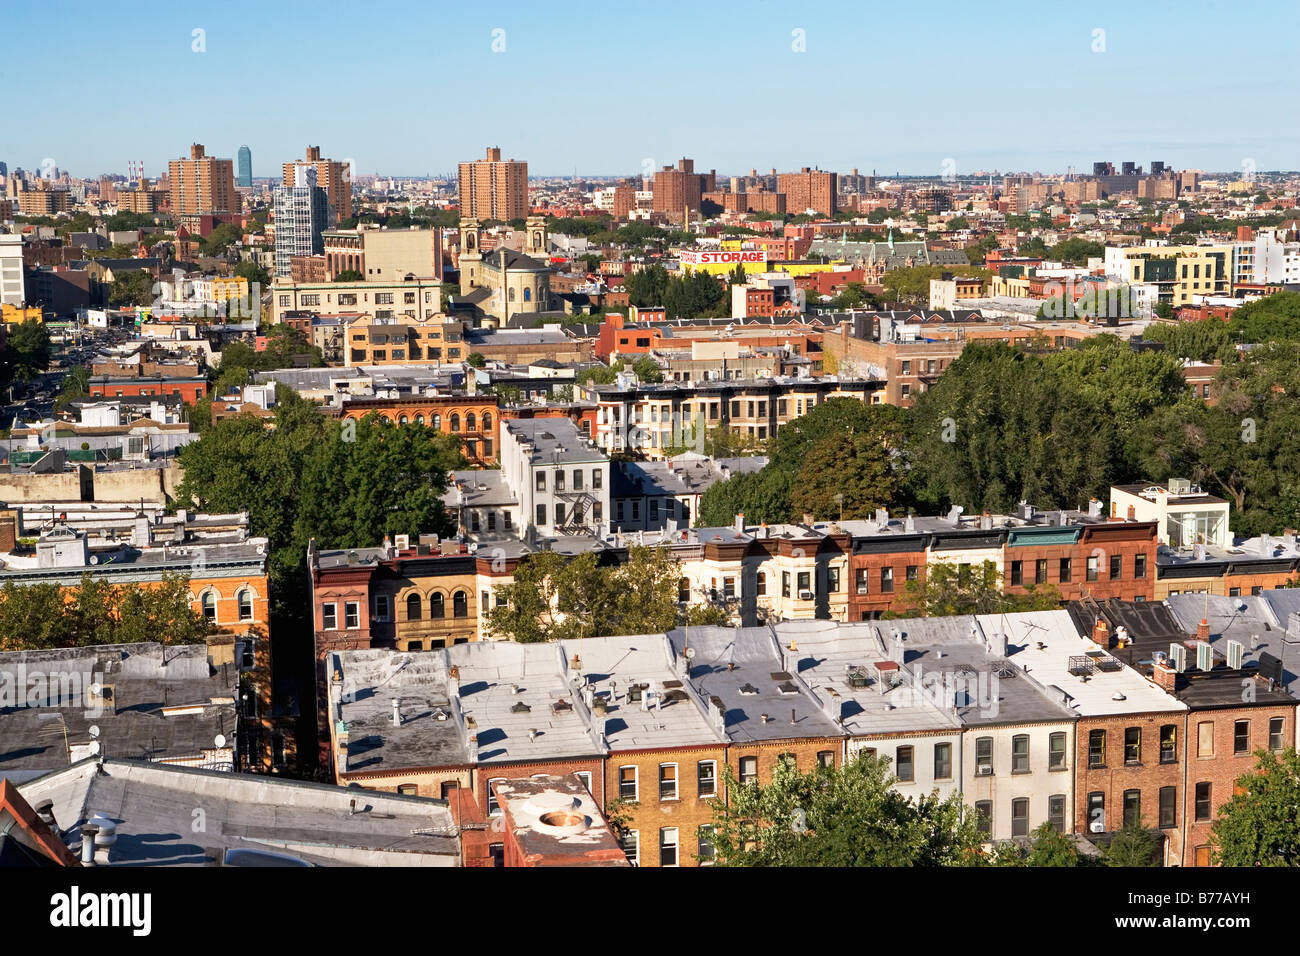 View of Brooklyn, New York Stock Photo